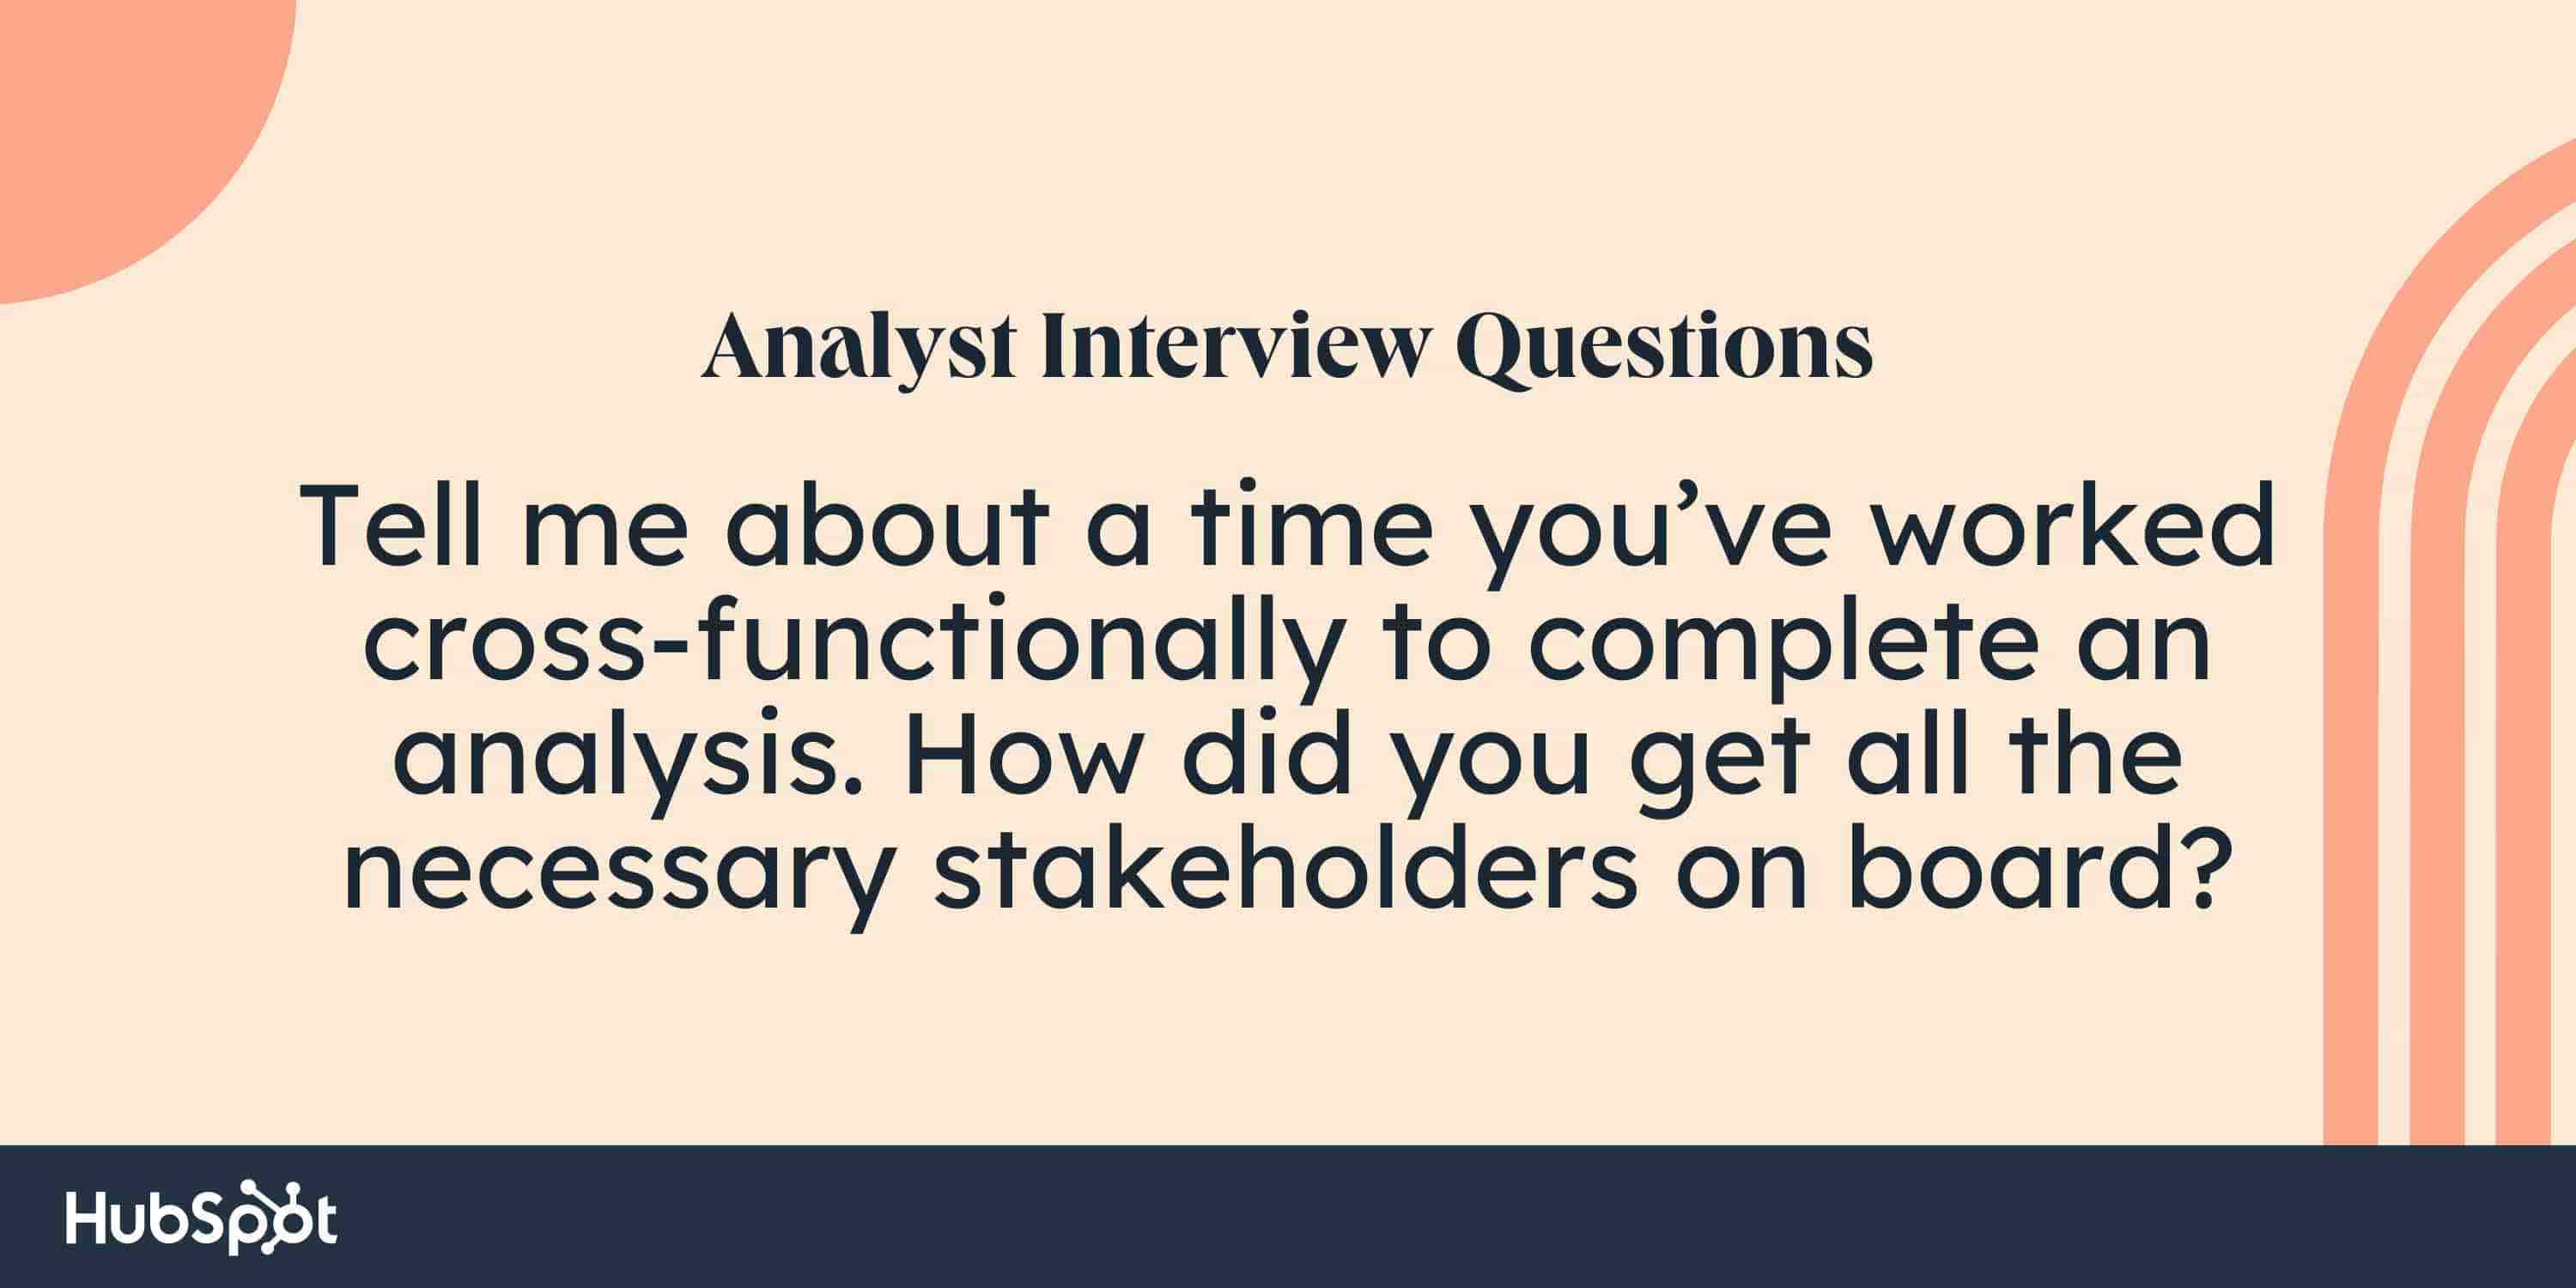 sales Analyst Interview Questions. Tell me about a time you’ve worked cross-functionally to complete an analysis. How did you get all the necessary stakeholders on board?